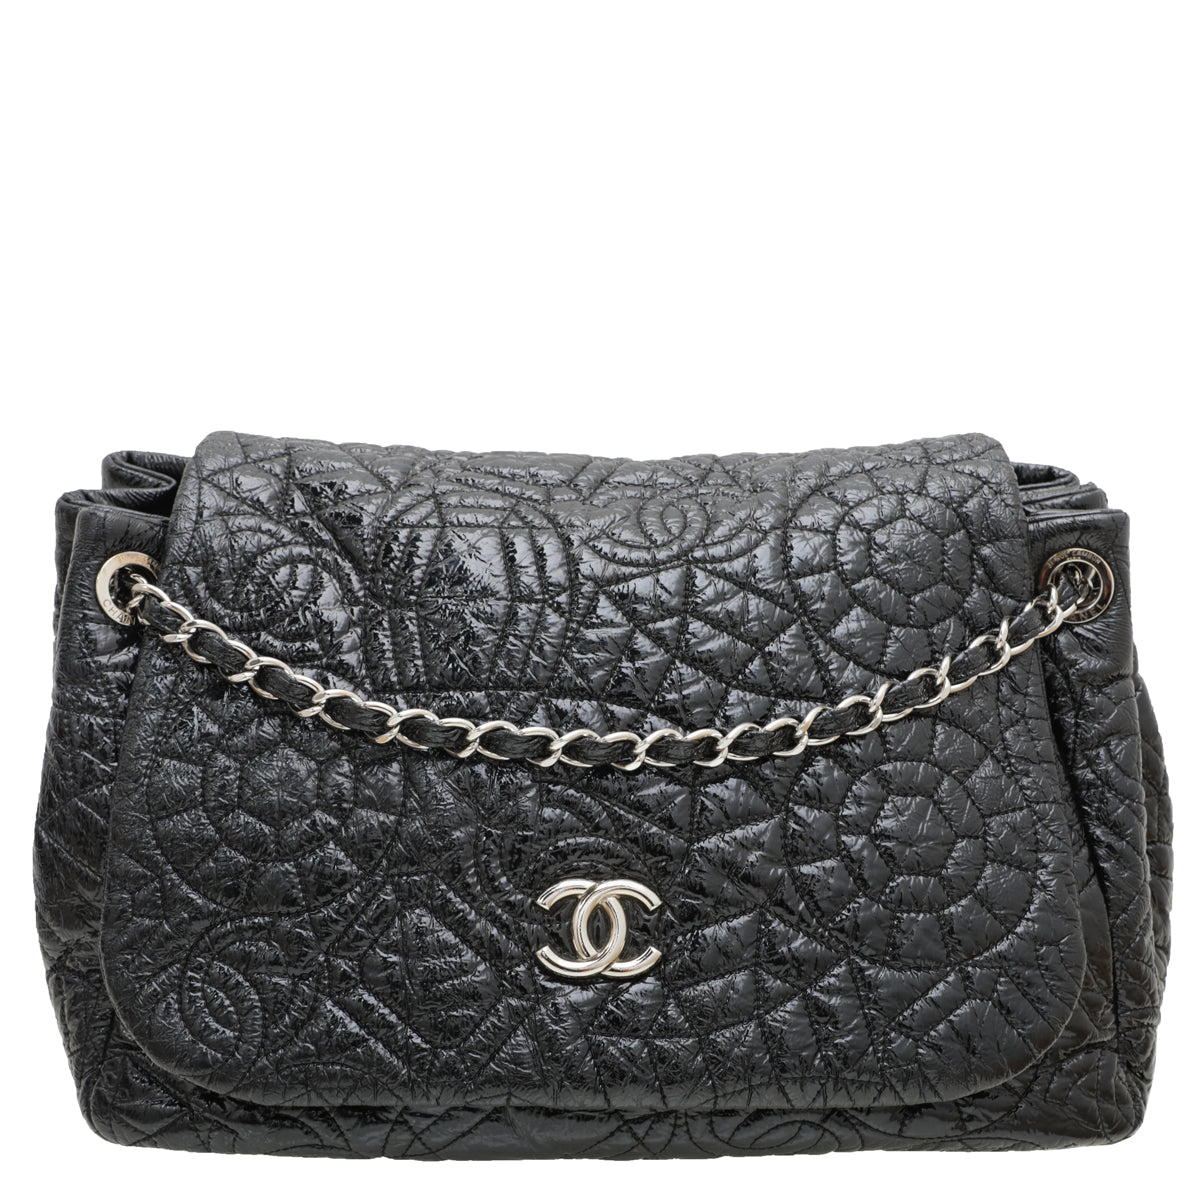 CHANEL Puzzle Black Quilted Patent Leather Flap Bag